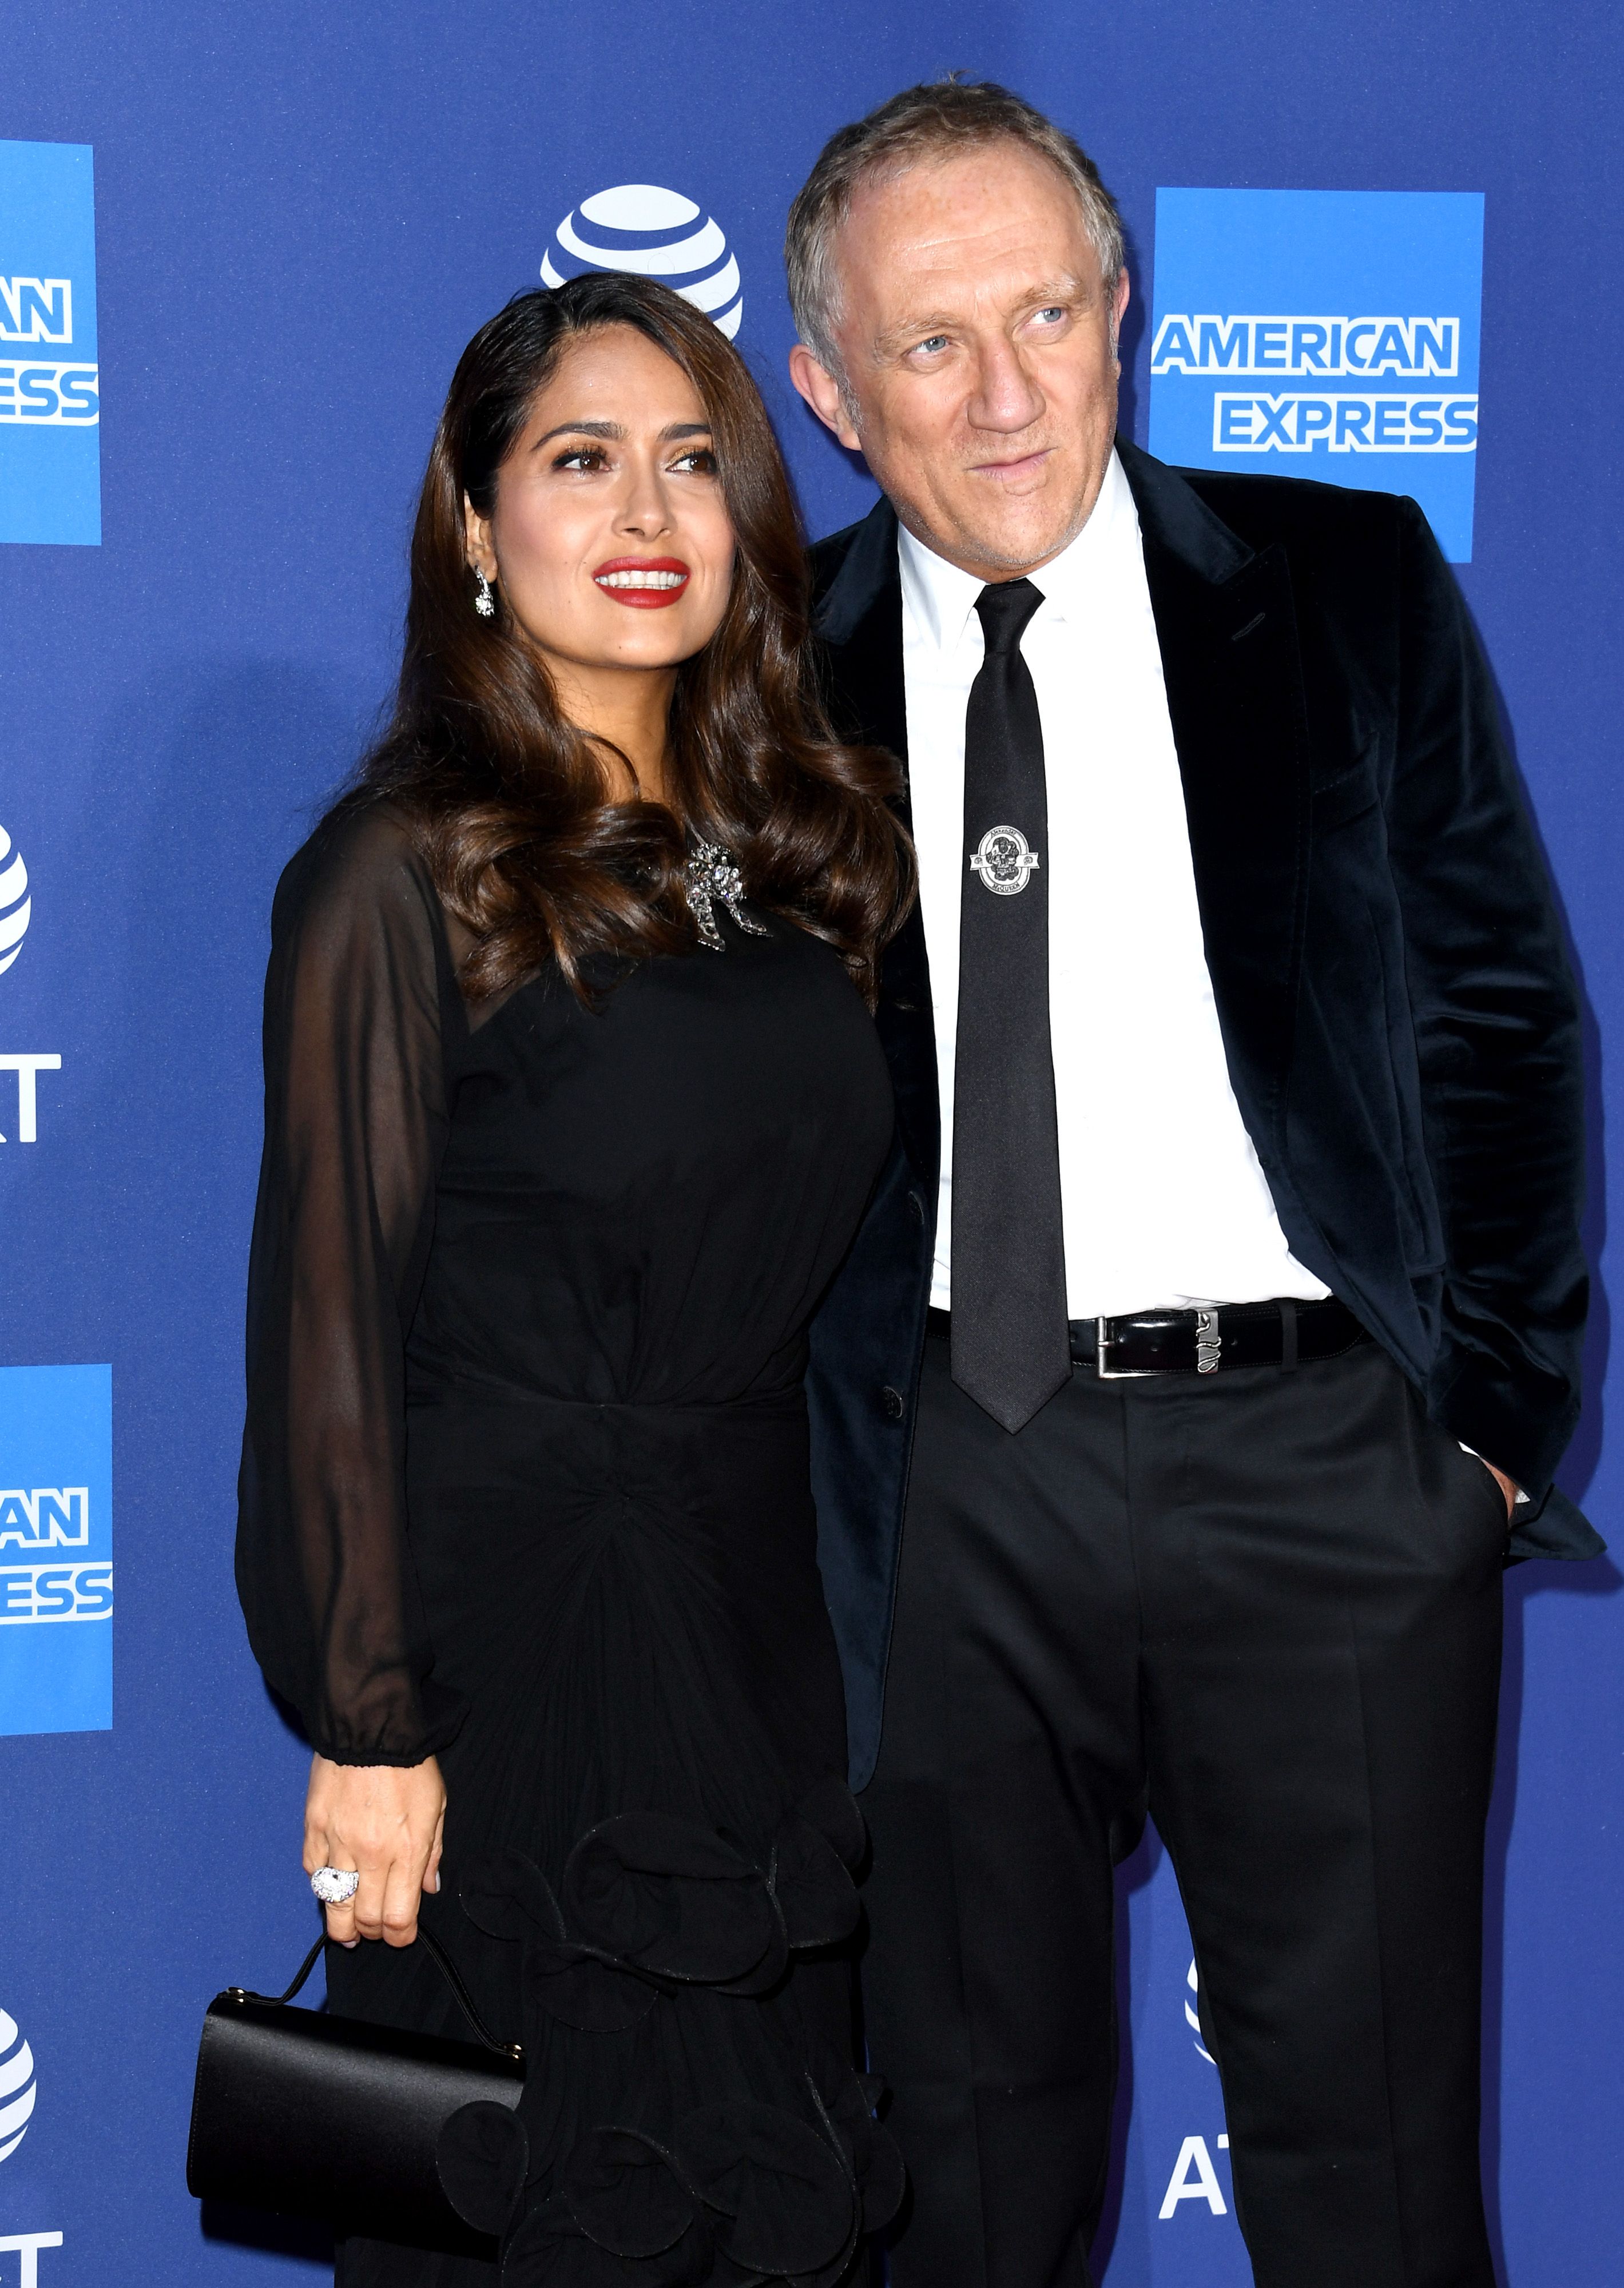 Salma Hayek and François-Henri Pinault during the 31st Annual Palm Springs International Film Festival Film Awards Gala at Palm Springs Convention Center on January 02, 2020 in Palm Springs, California. | Source: Getty Images